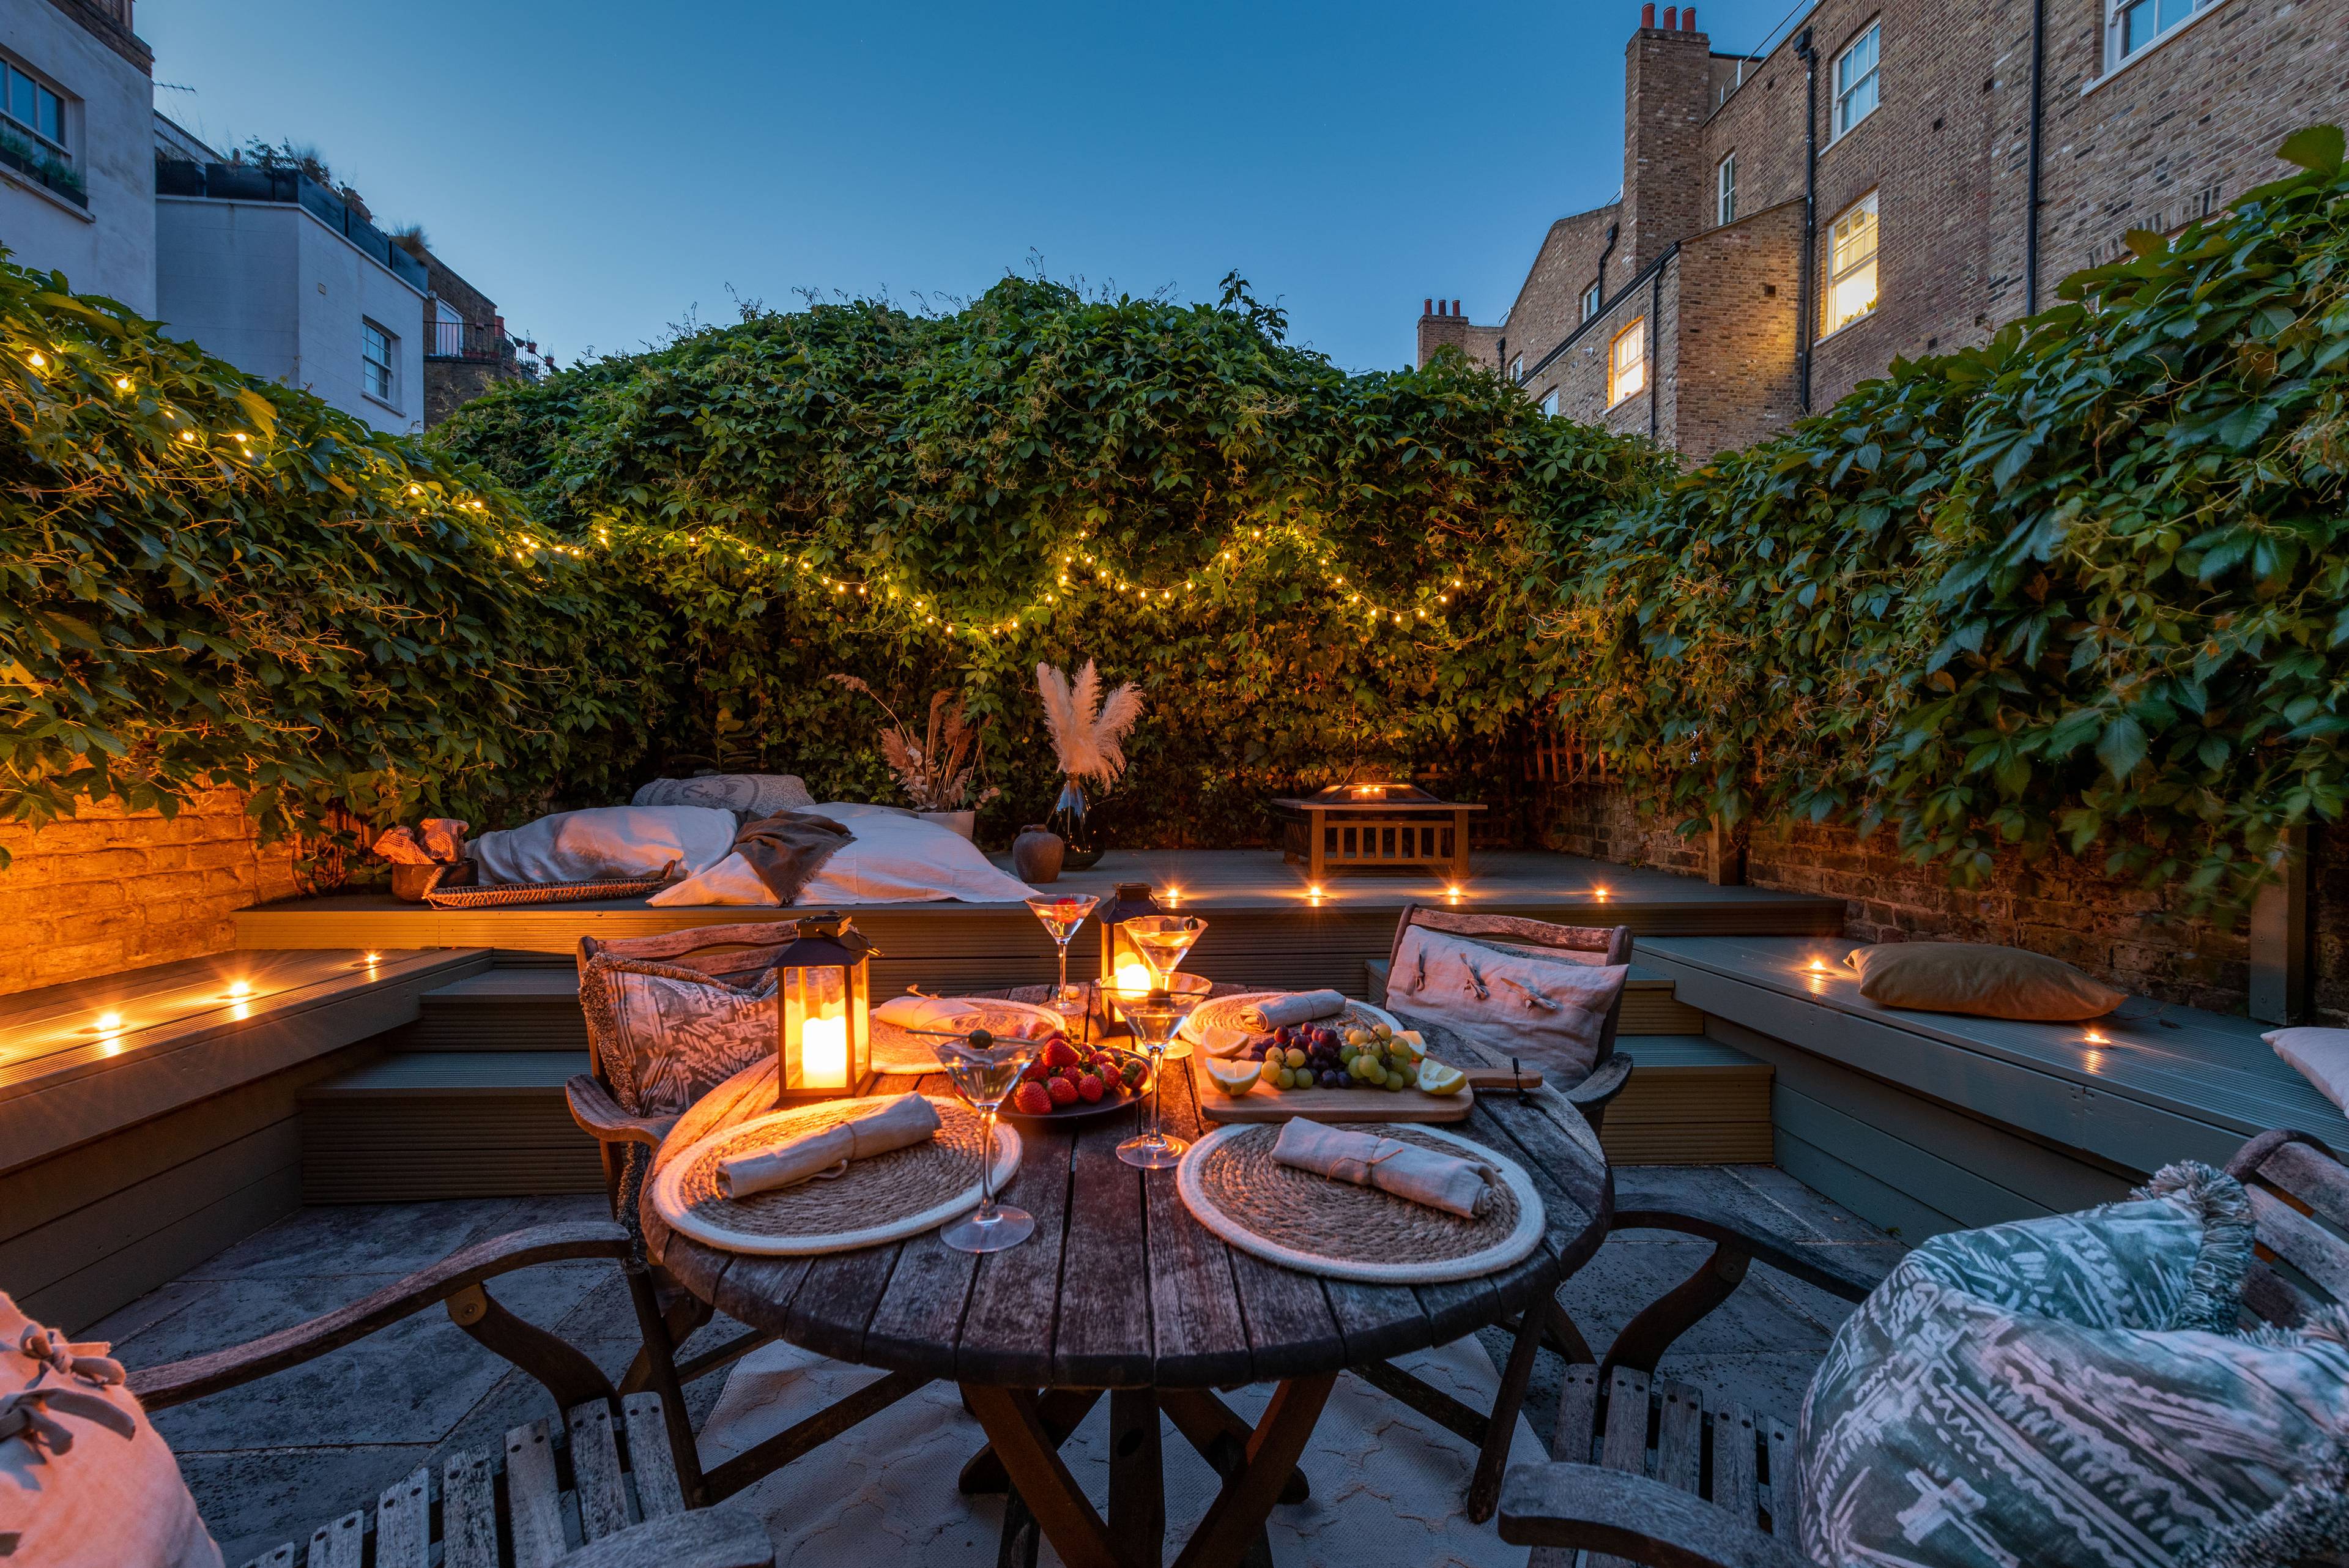 A fabulously located garden oasis flat in elegant Chelsea, next to Fulham Road and the historically famous King's Road